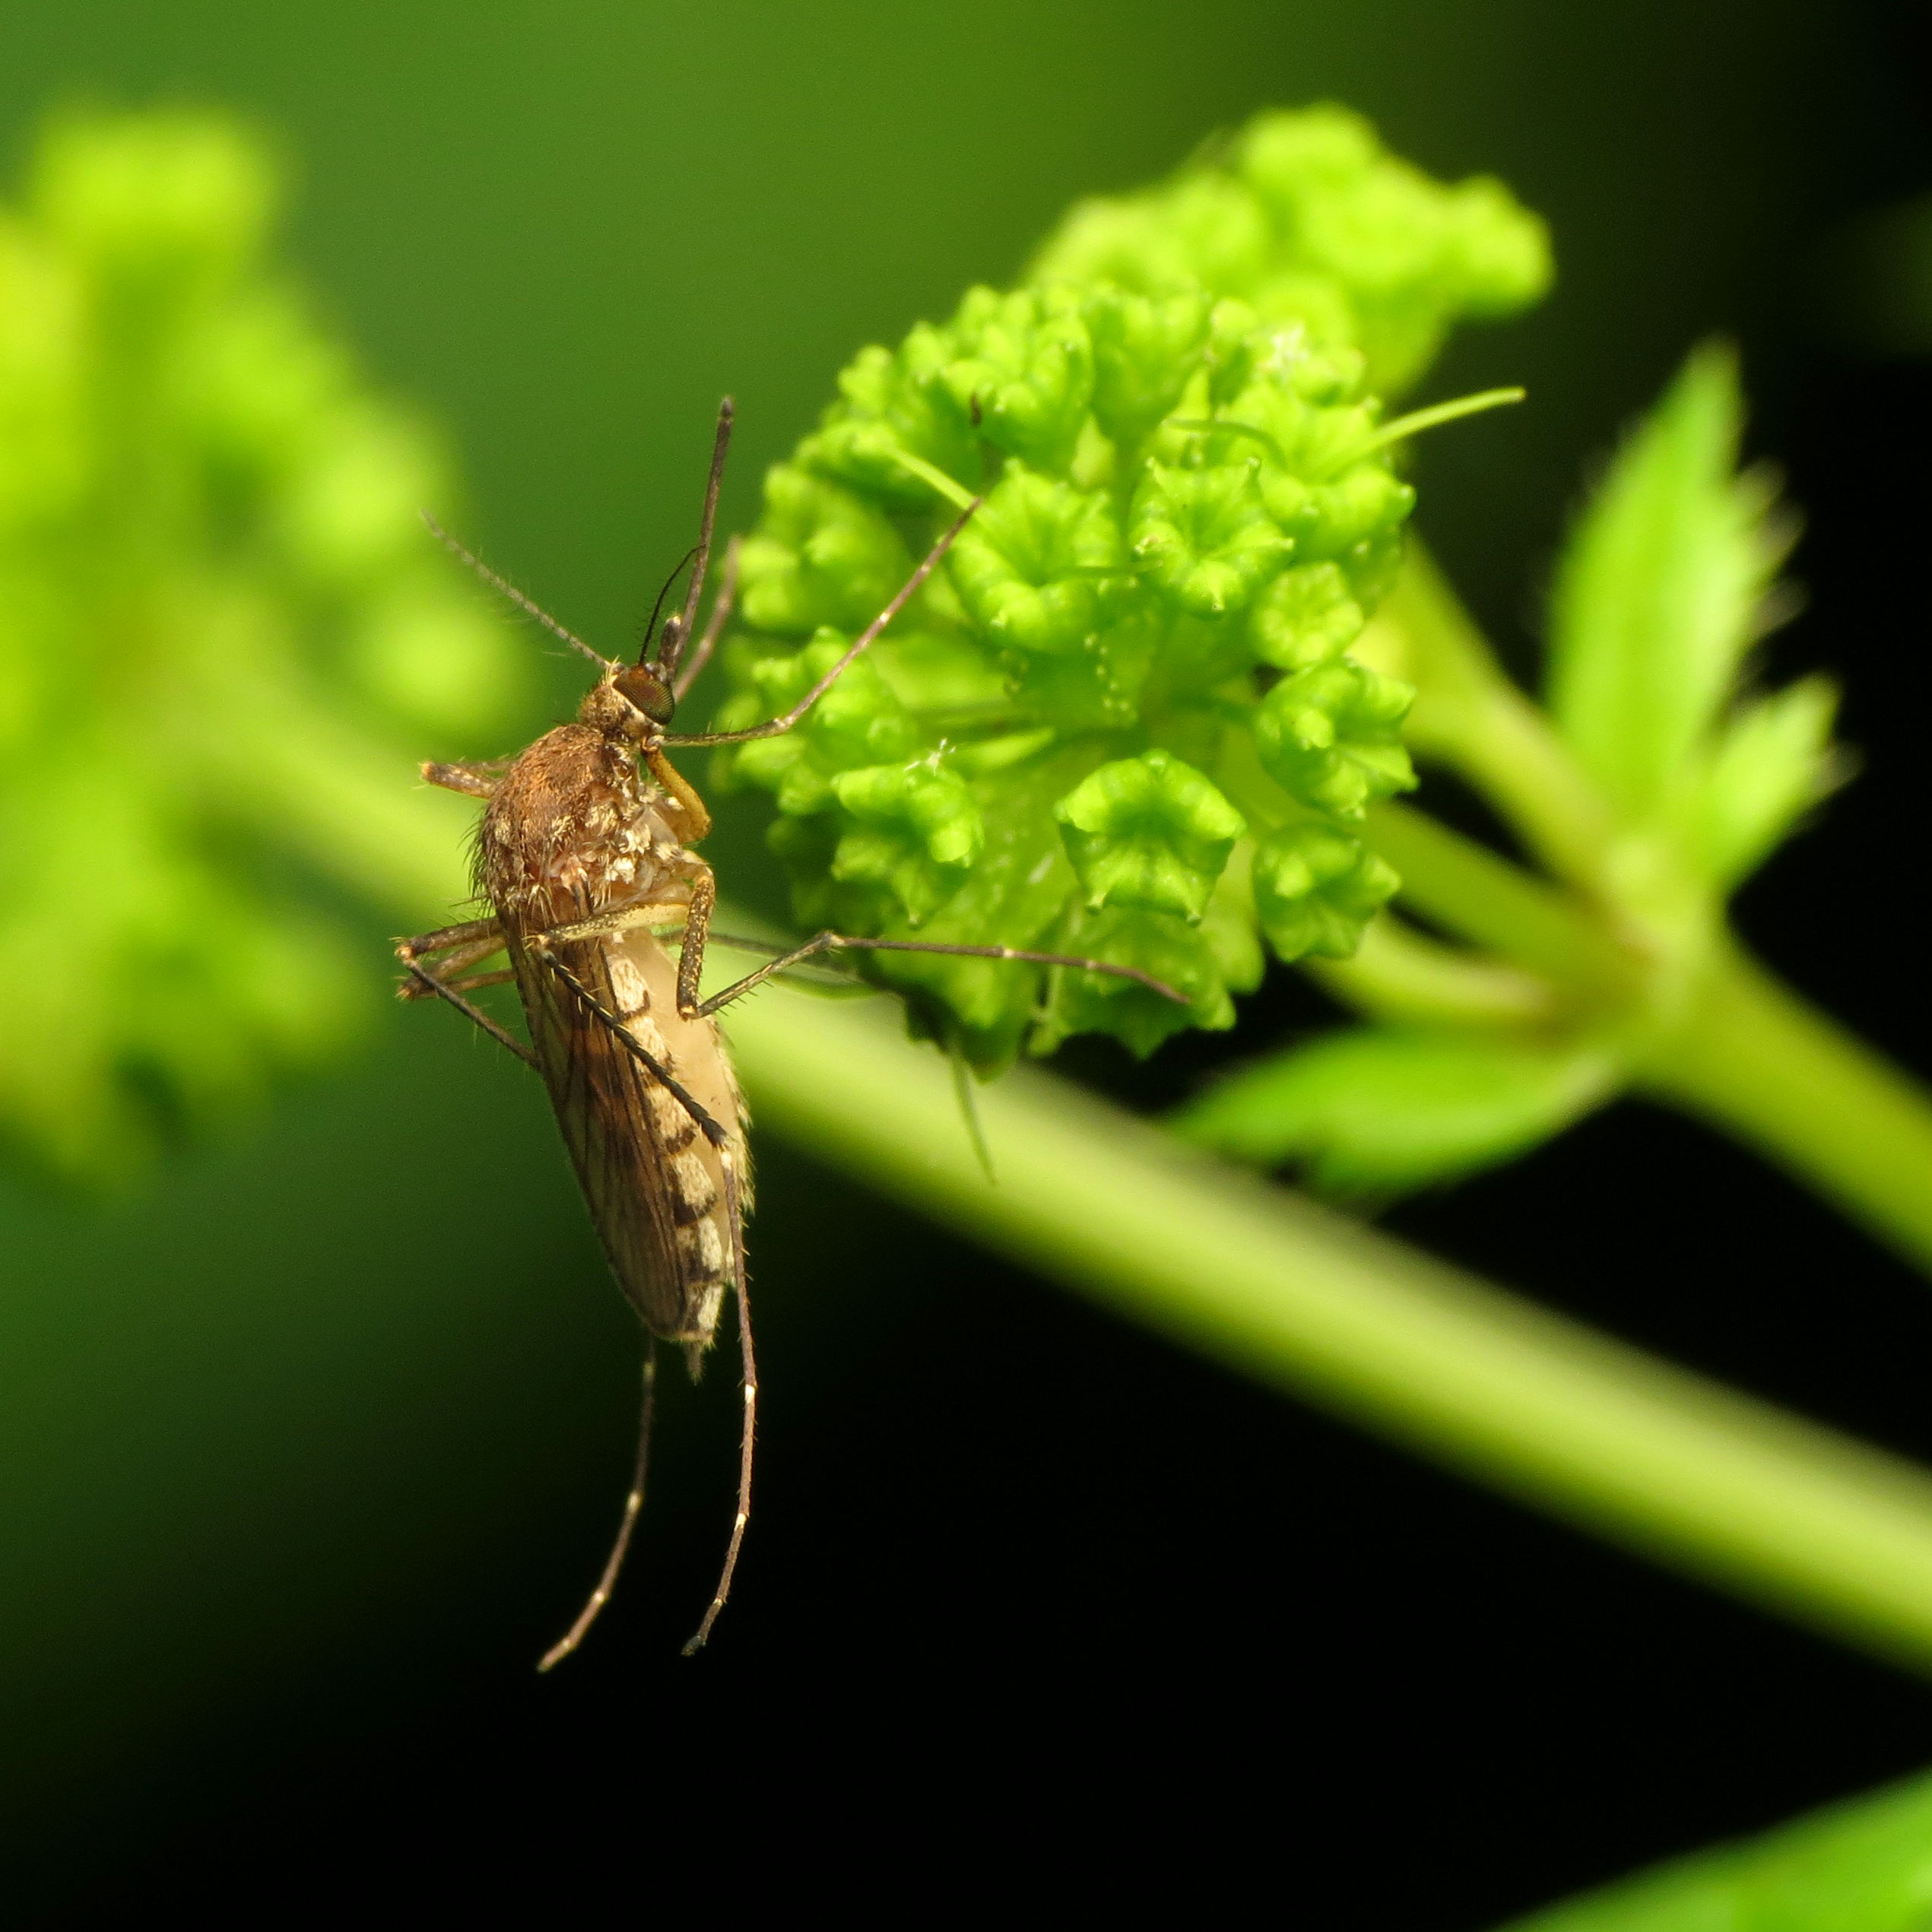 A mosquito on a cluster of green flowers. The mosquito has fuzzy upper parts, a long mouthpart, and six long, spindly, angular legs.